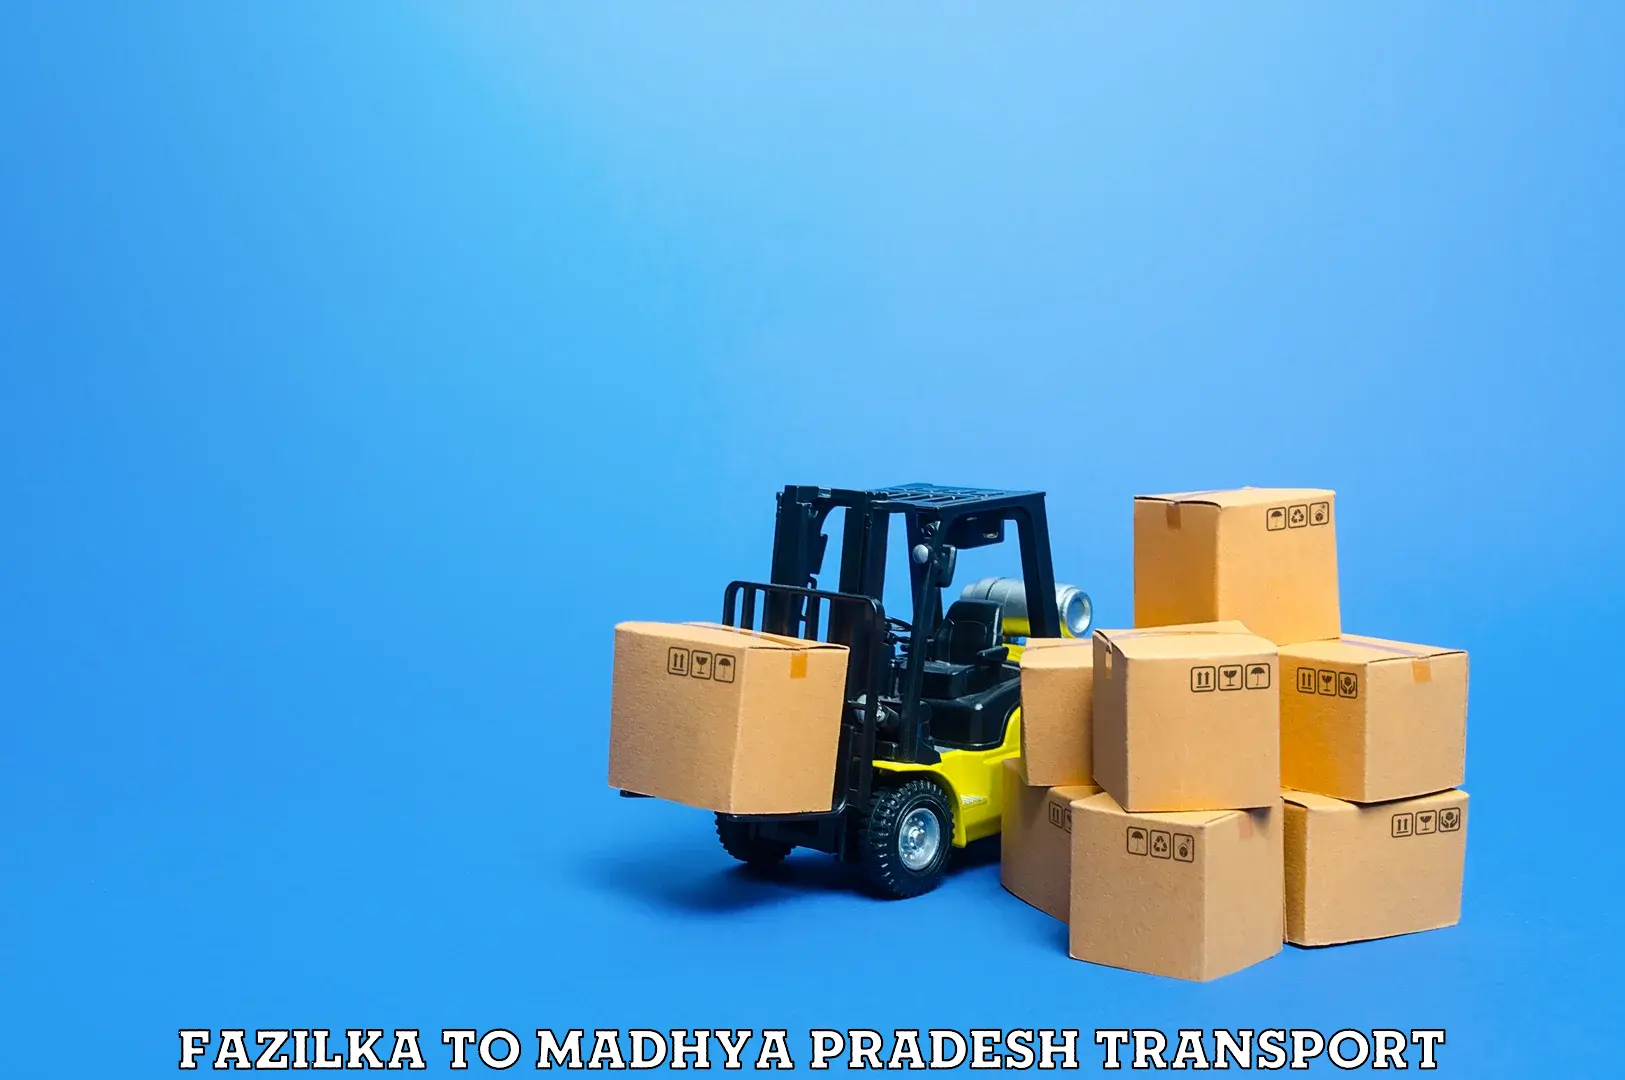 Commercial transport service Fazilka to Sheopur